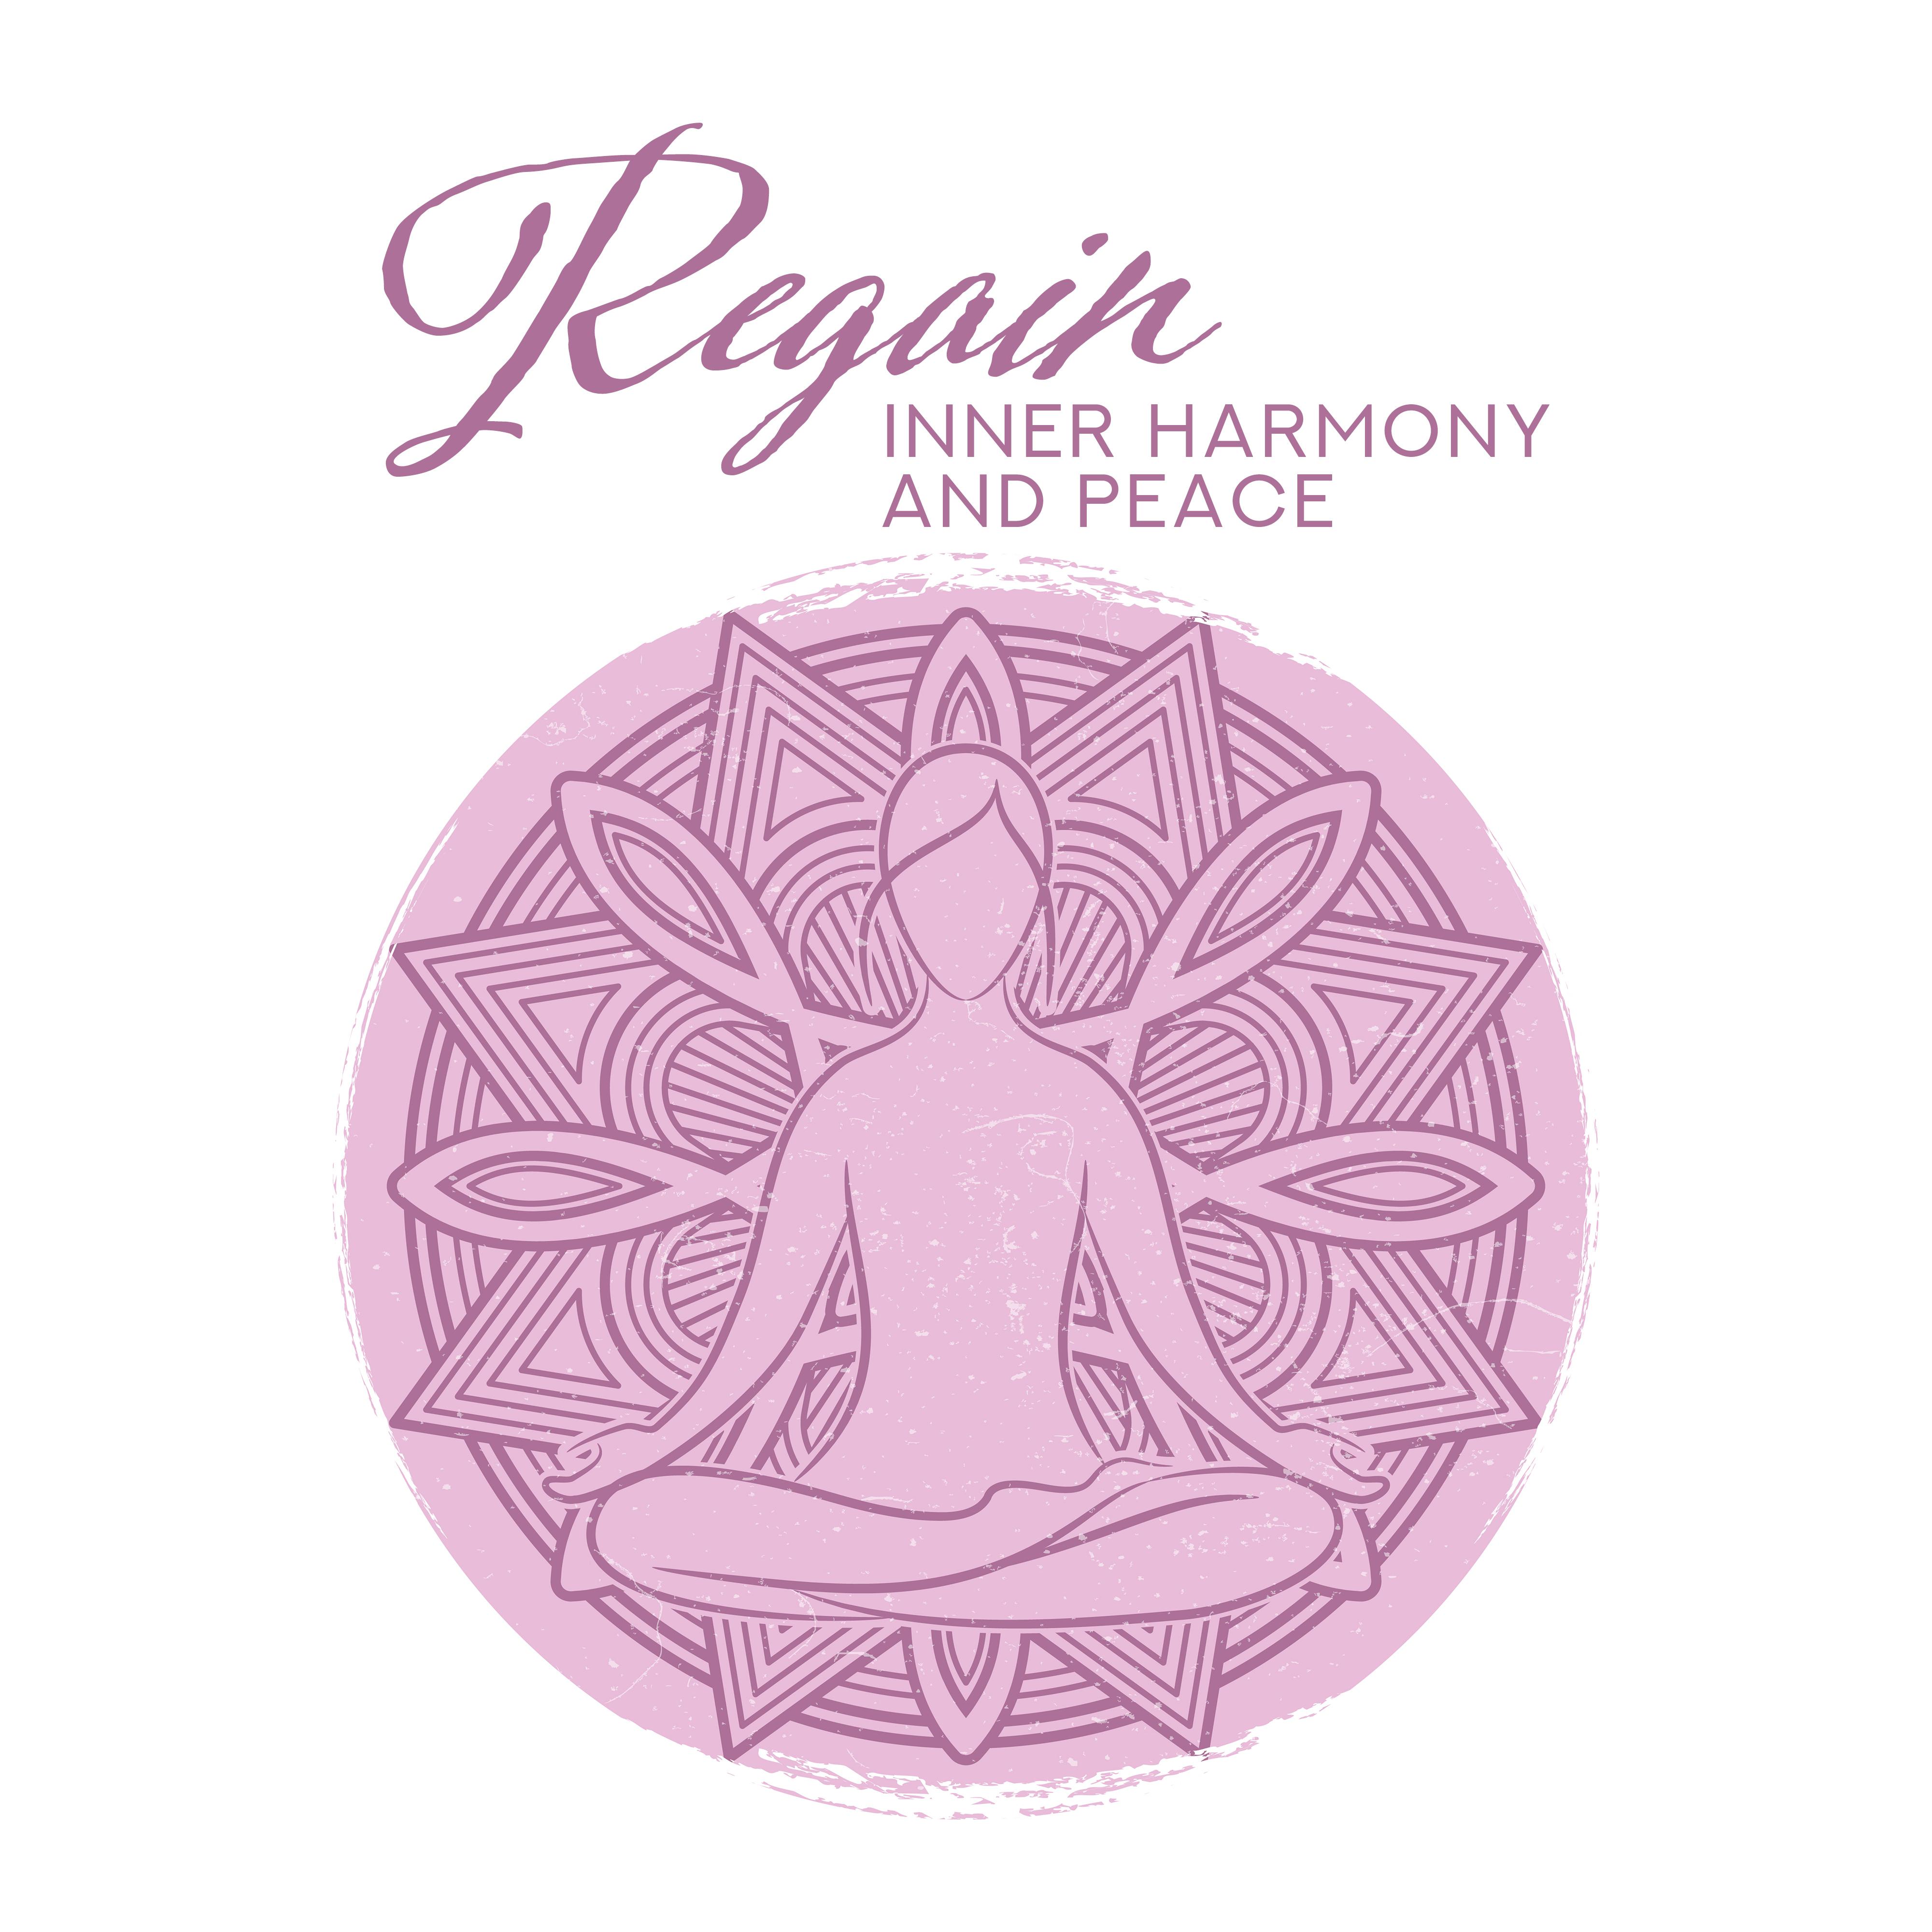 Regain Inner Harmony and Peace - 15 Tracks for Meditation Practice and Yoga Exercises to Help Restore Spiritual Balance, Peace and Harmony